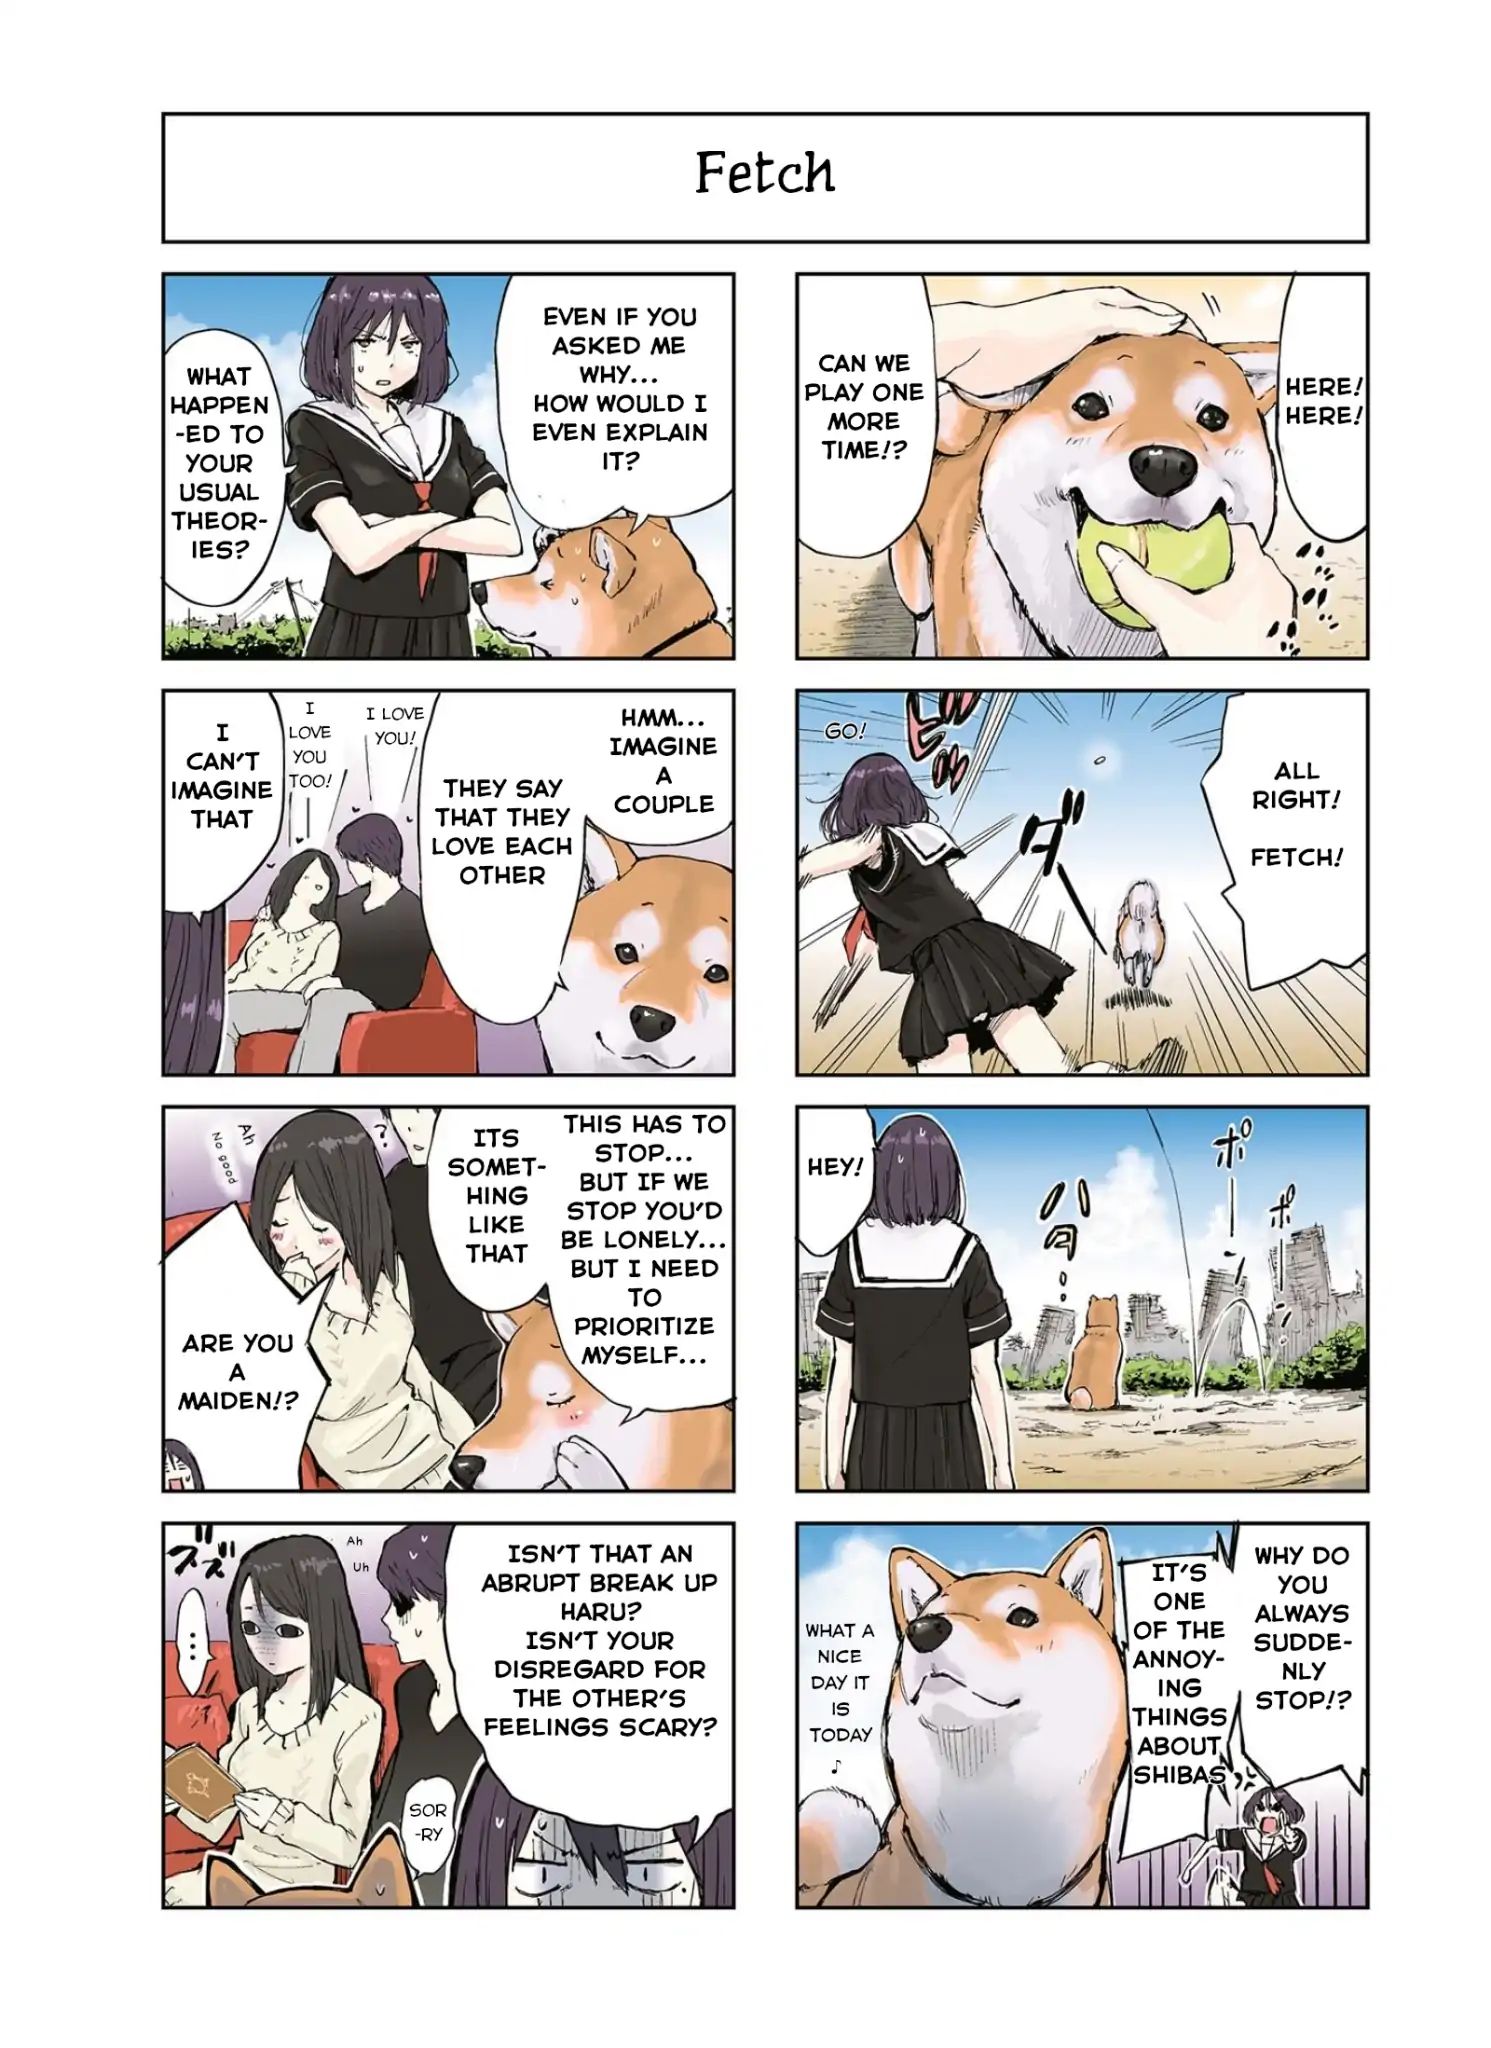 Roaming The Apocalypse With My Shiba Inu - chapter 7 - #3